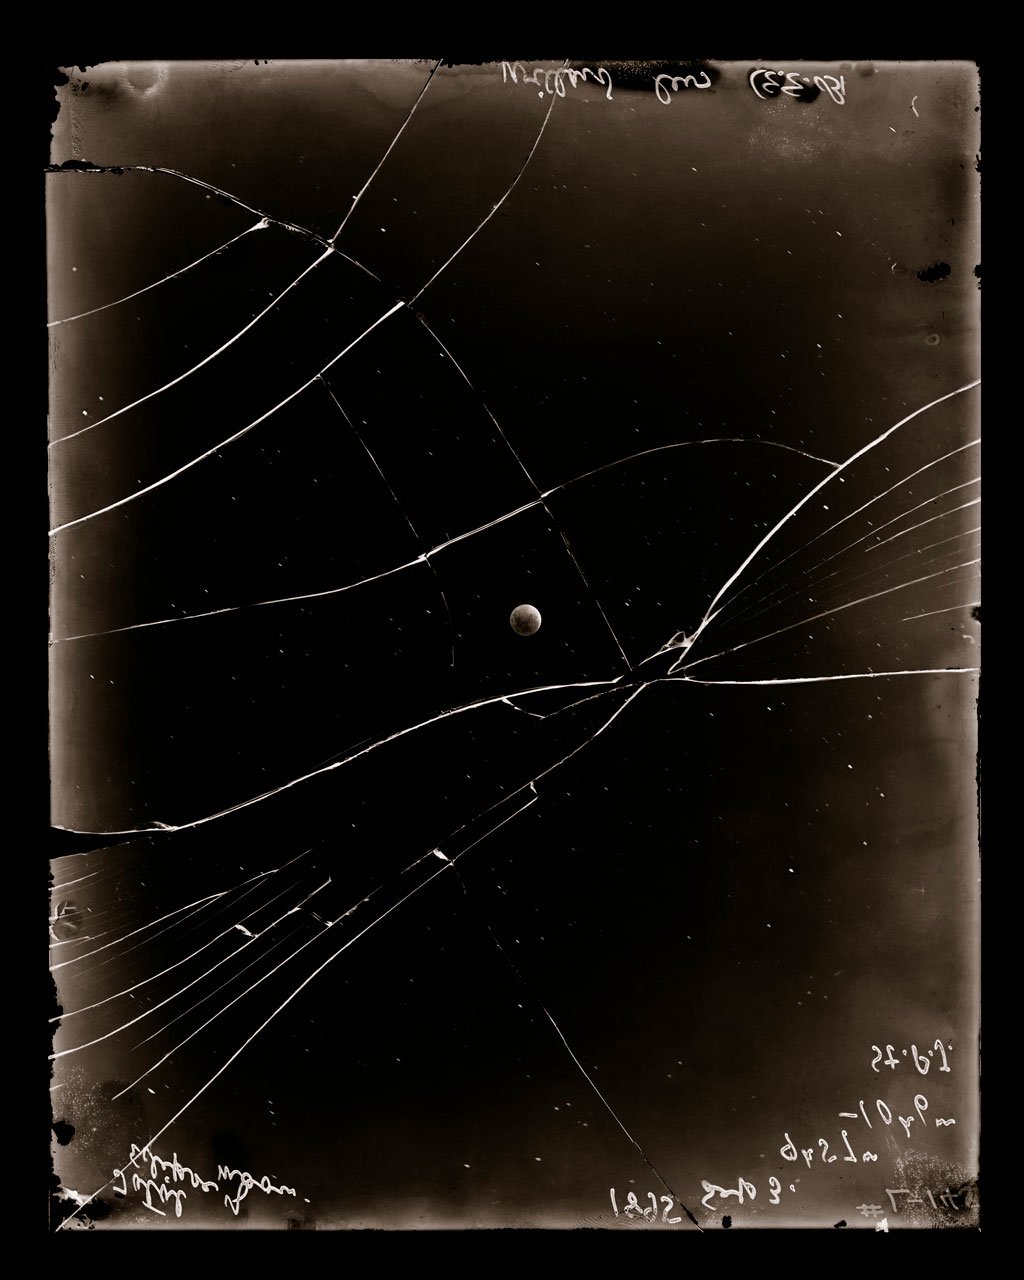  Linda Connor,  Lunar Eclipse, September 3, 1895  Sublimation on Aluminum | 30 x 24 inches | HG16909 Images courtesy of the Lick Observatory Historical Collections Project, copyright Regents of the University of California. 